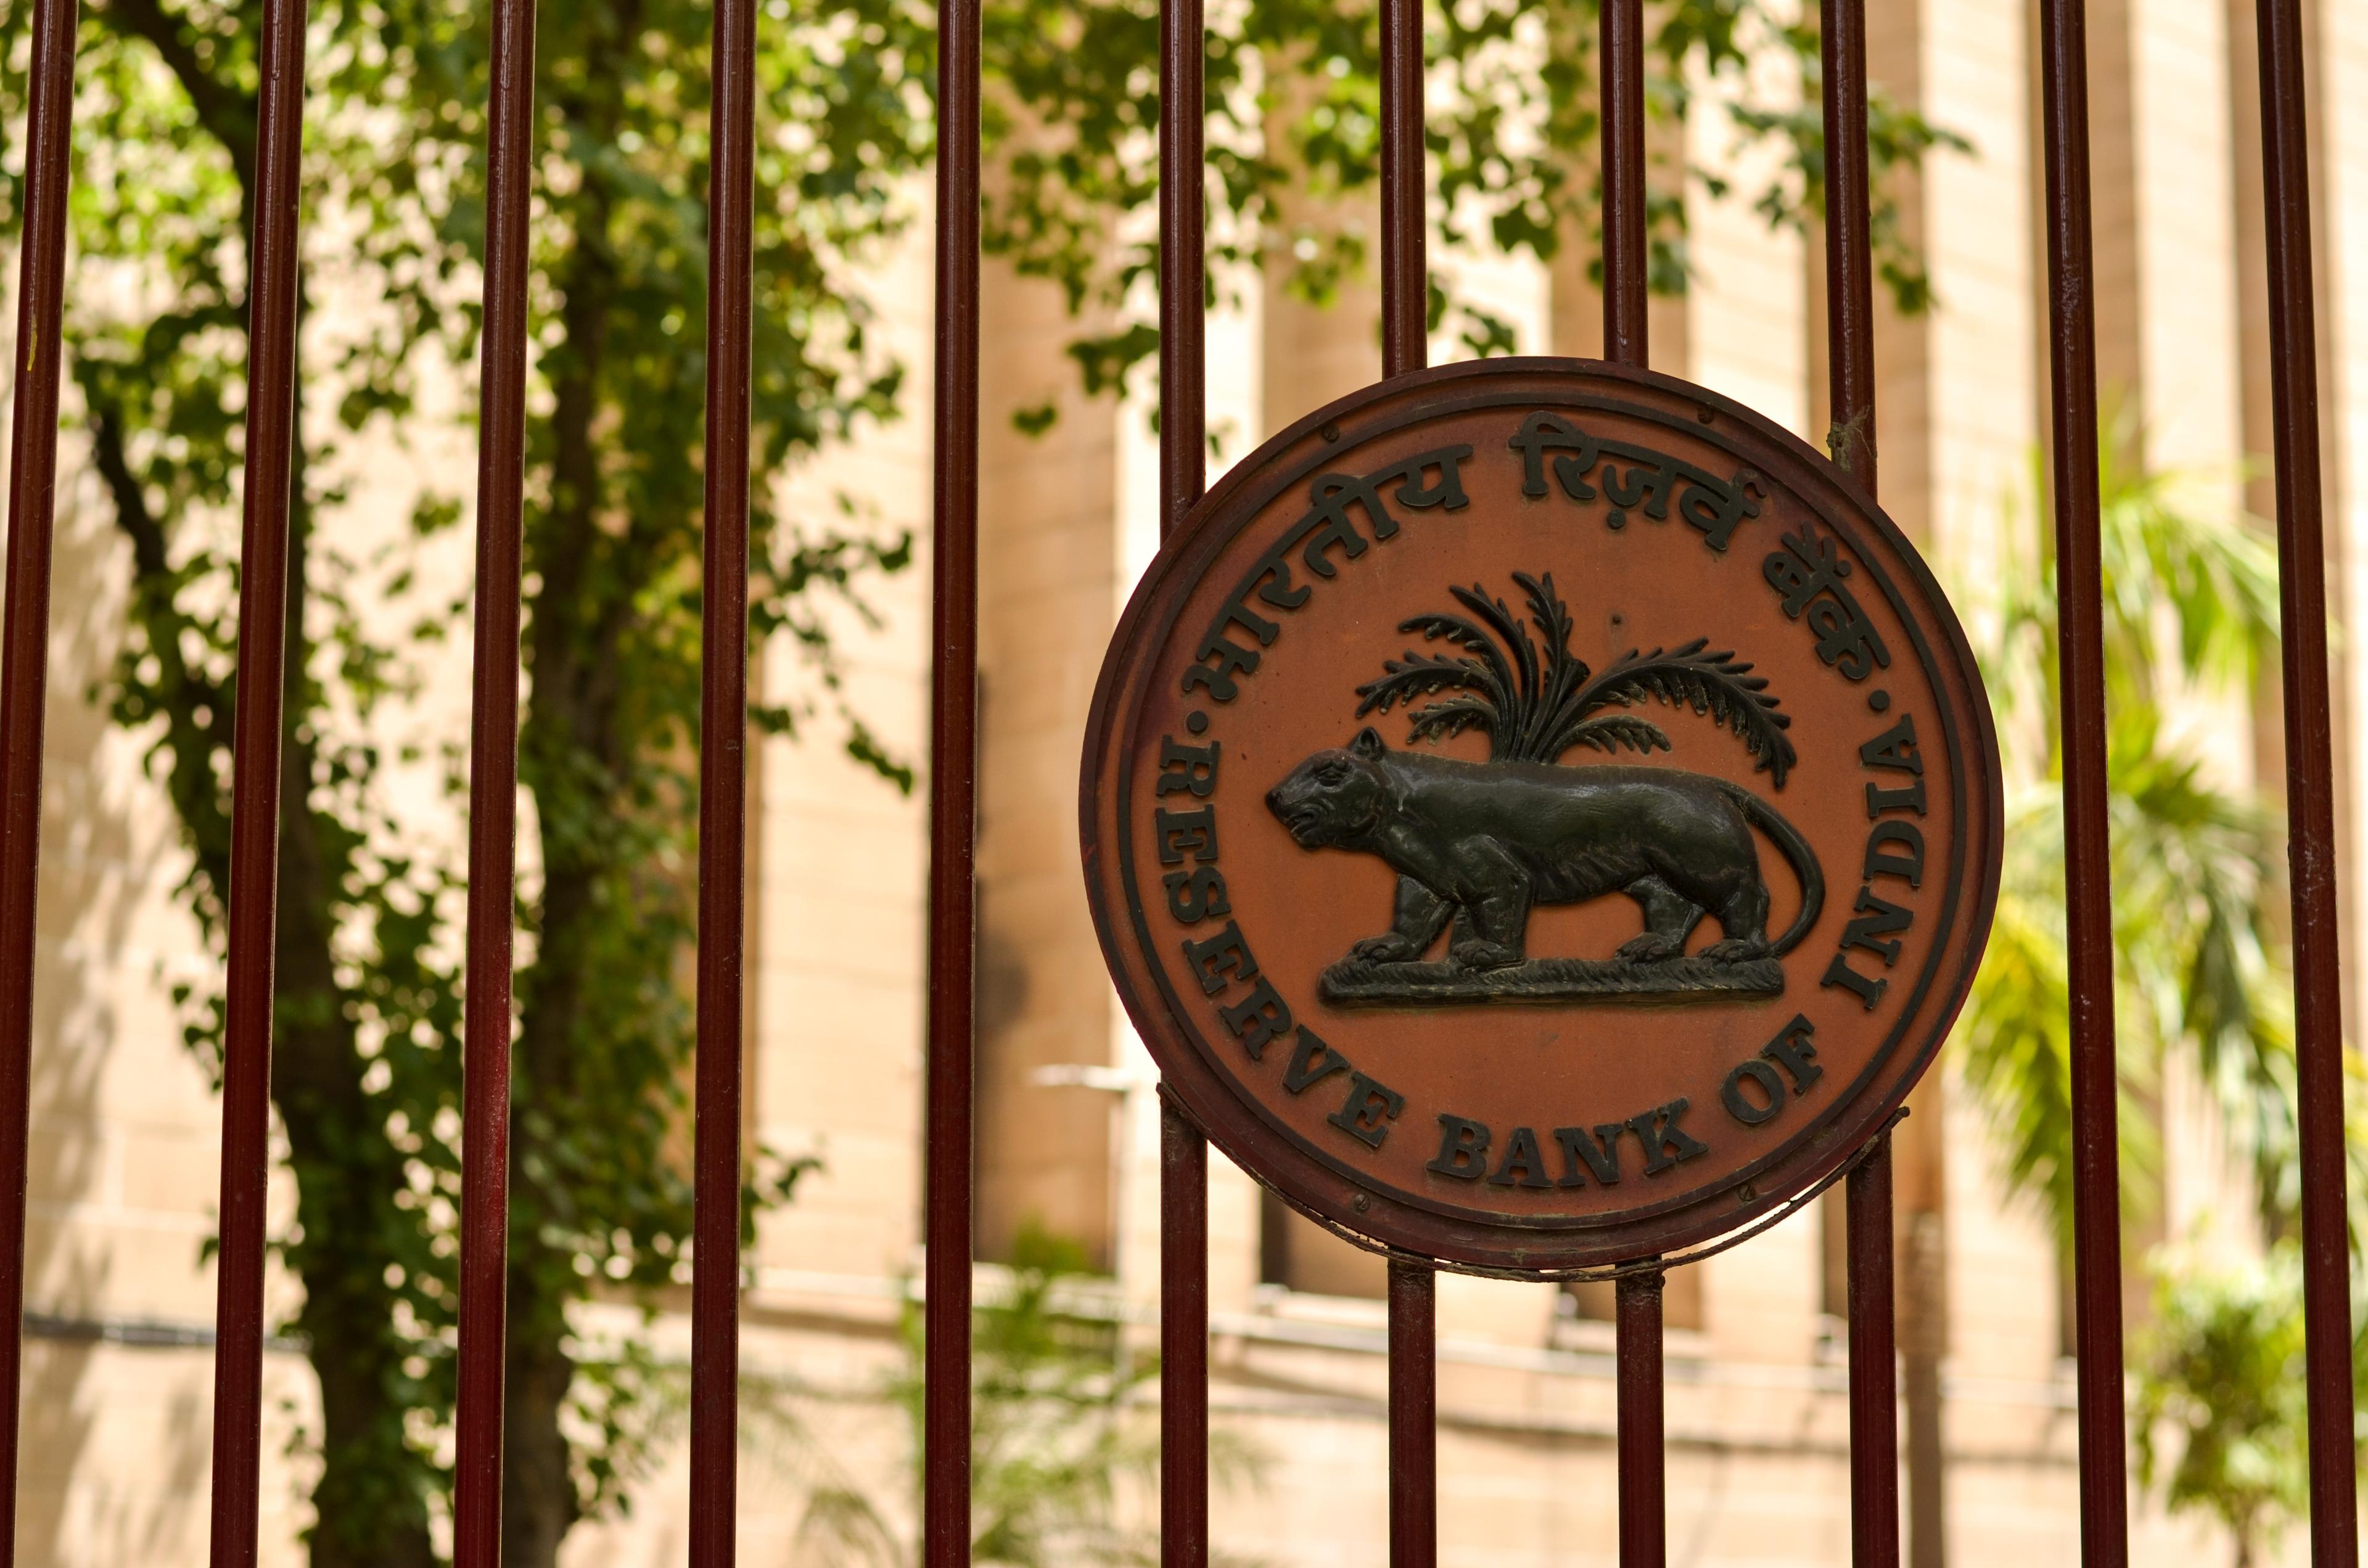 RBI Admits There is No Bitcoin Ban in India in an RTI Response